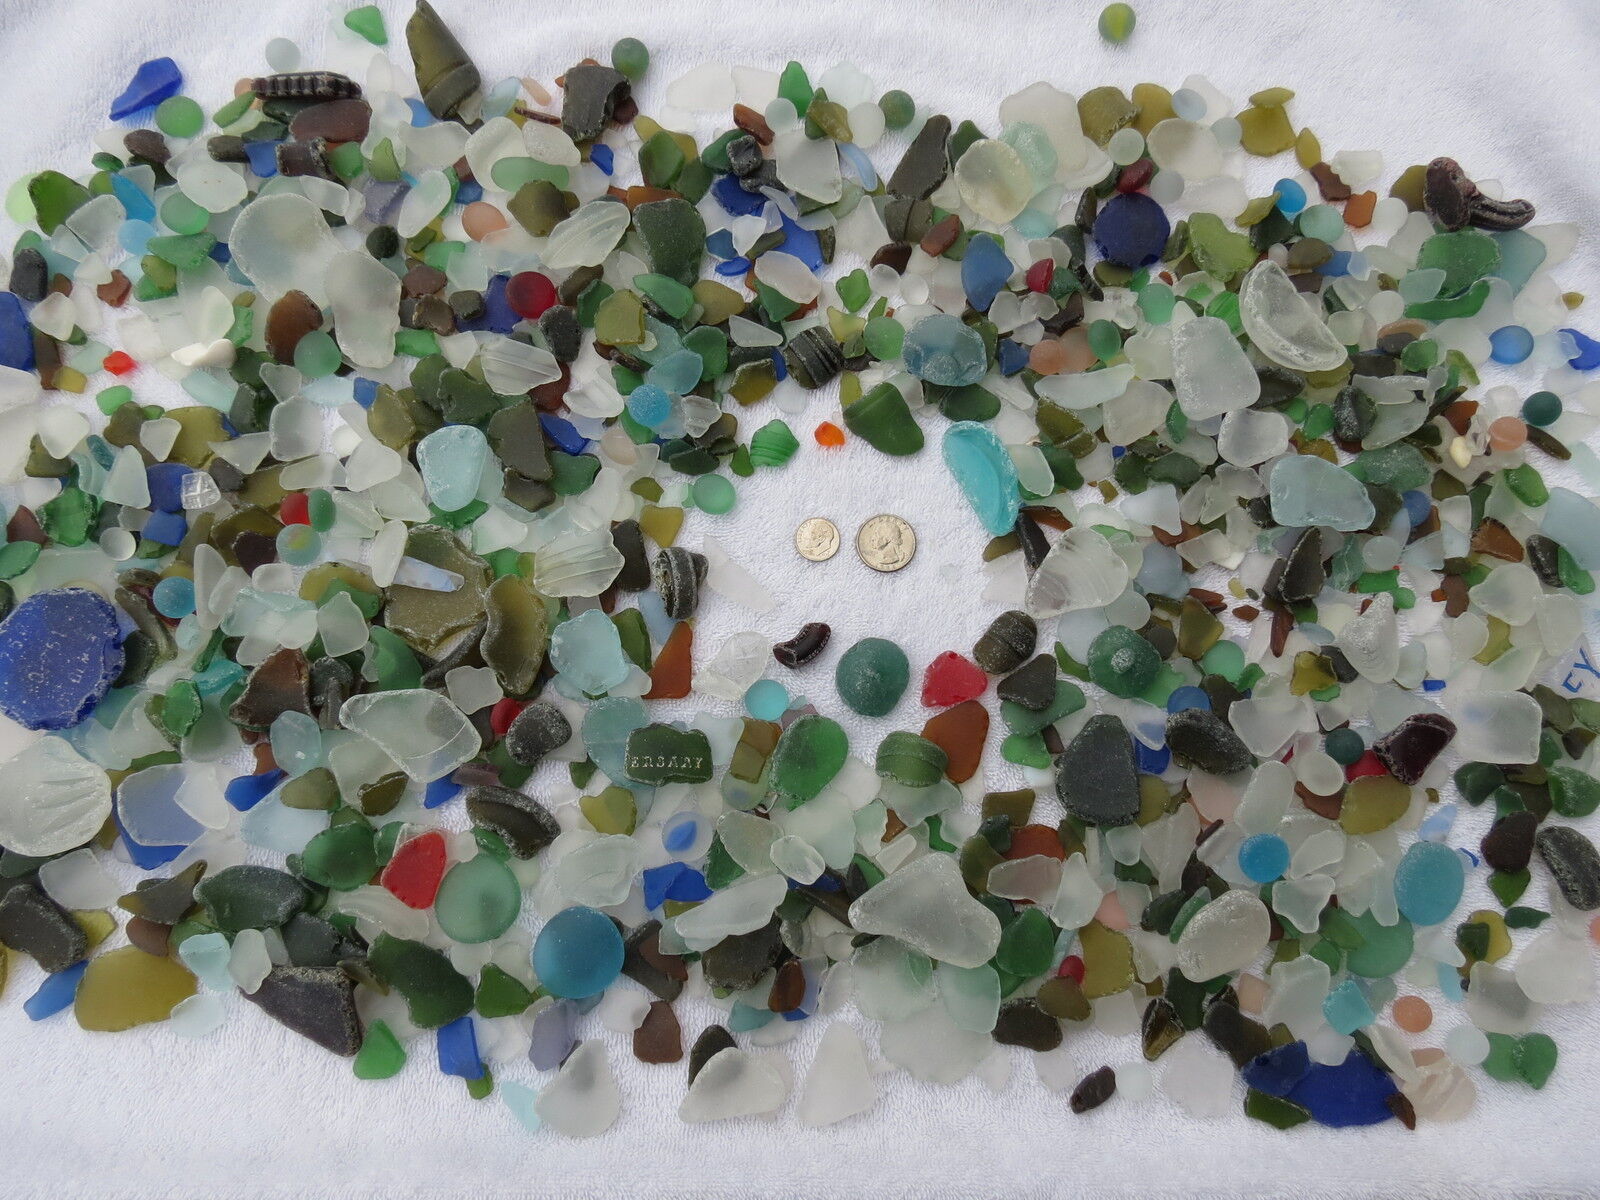 3 POUNDS MACHINE MADE RECYCLED TUMBLED BEACH SEA GLASS 1/2-2 INCH DECORATION 